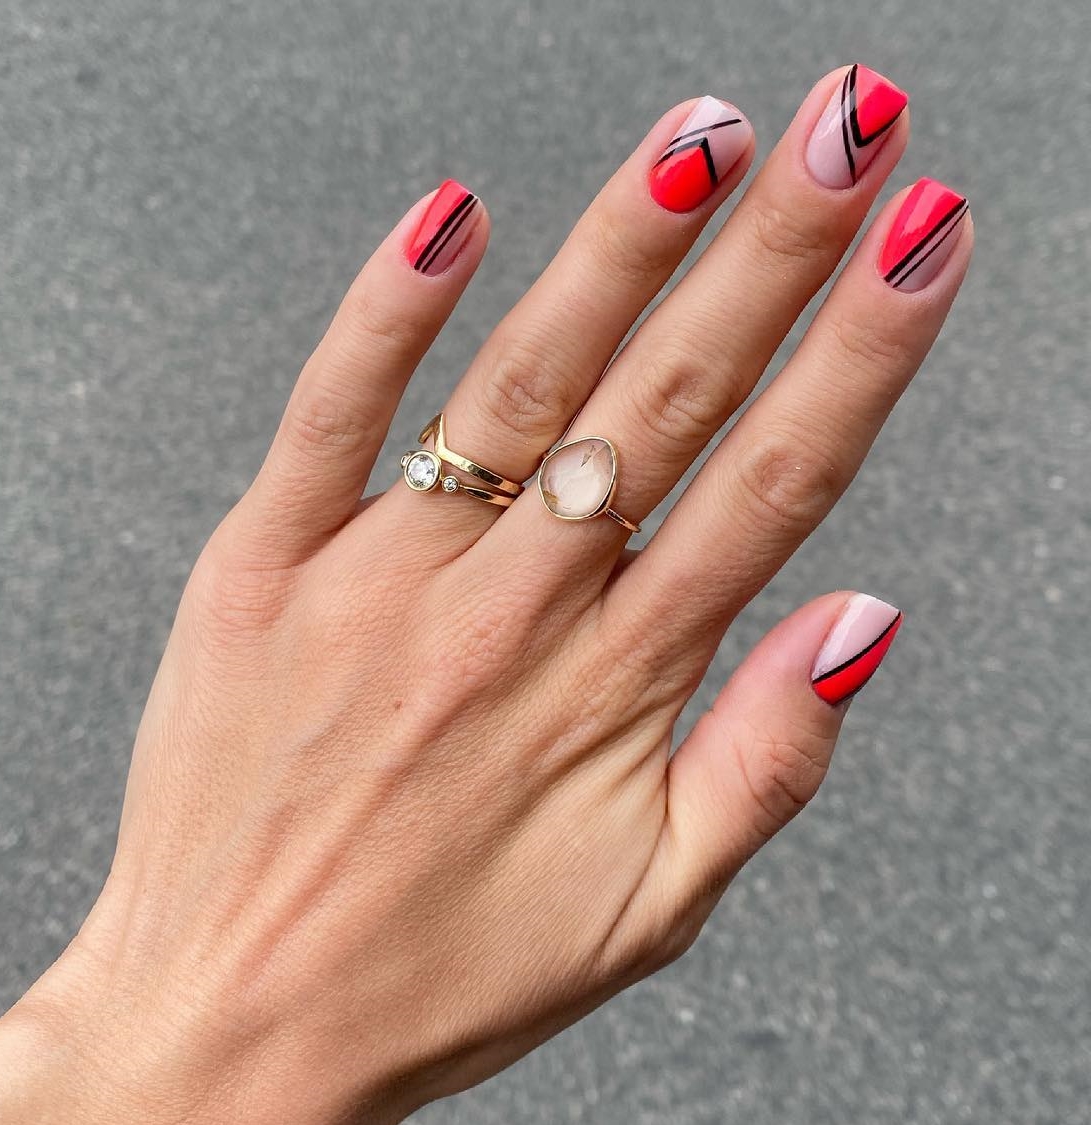 Short Geometric Black and Red Nails